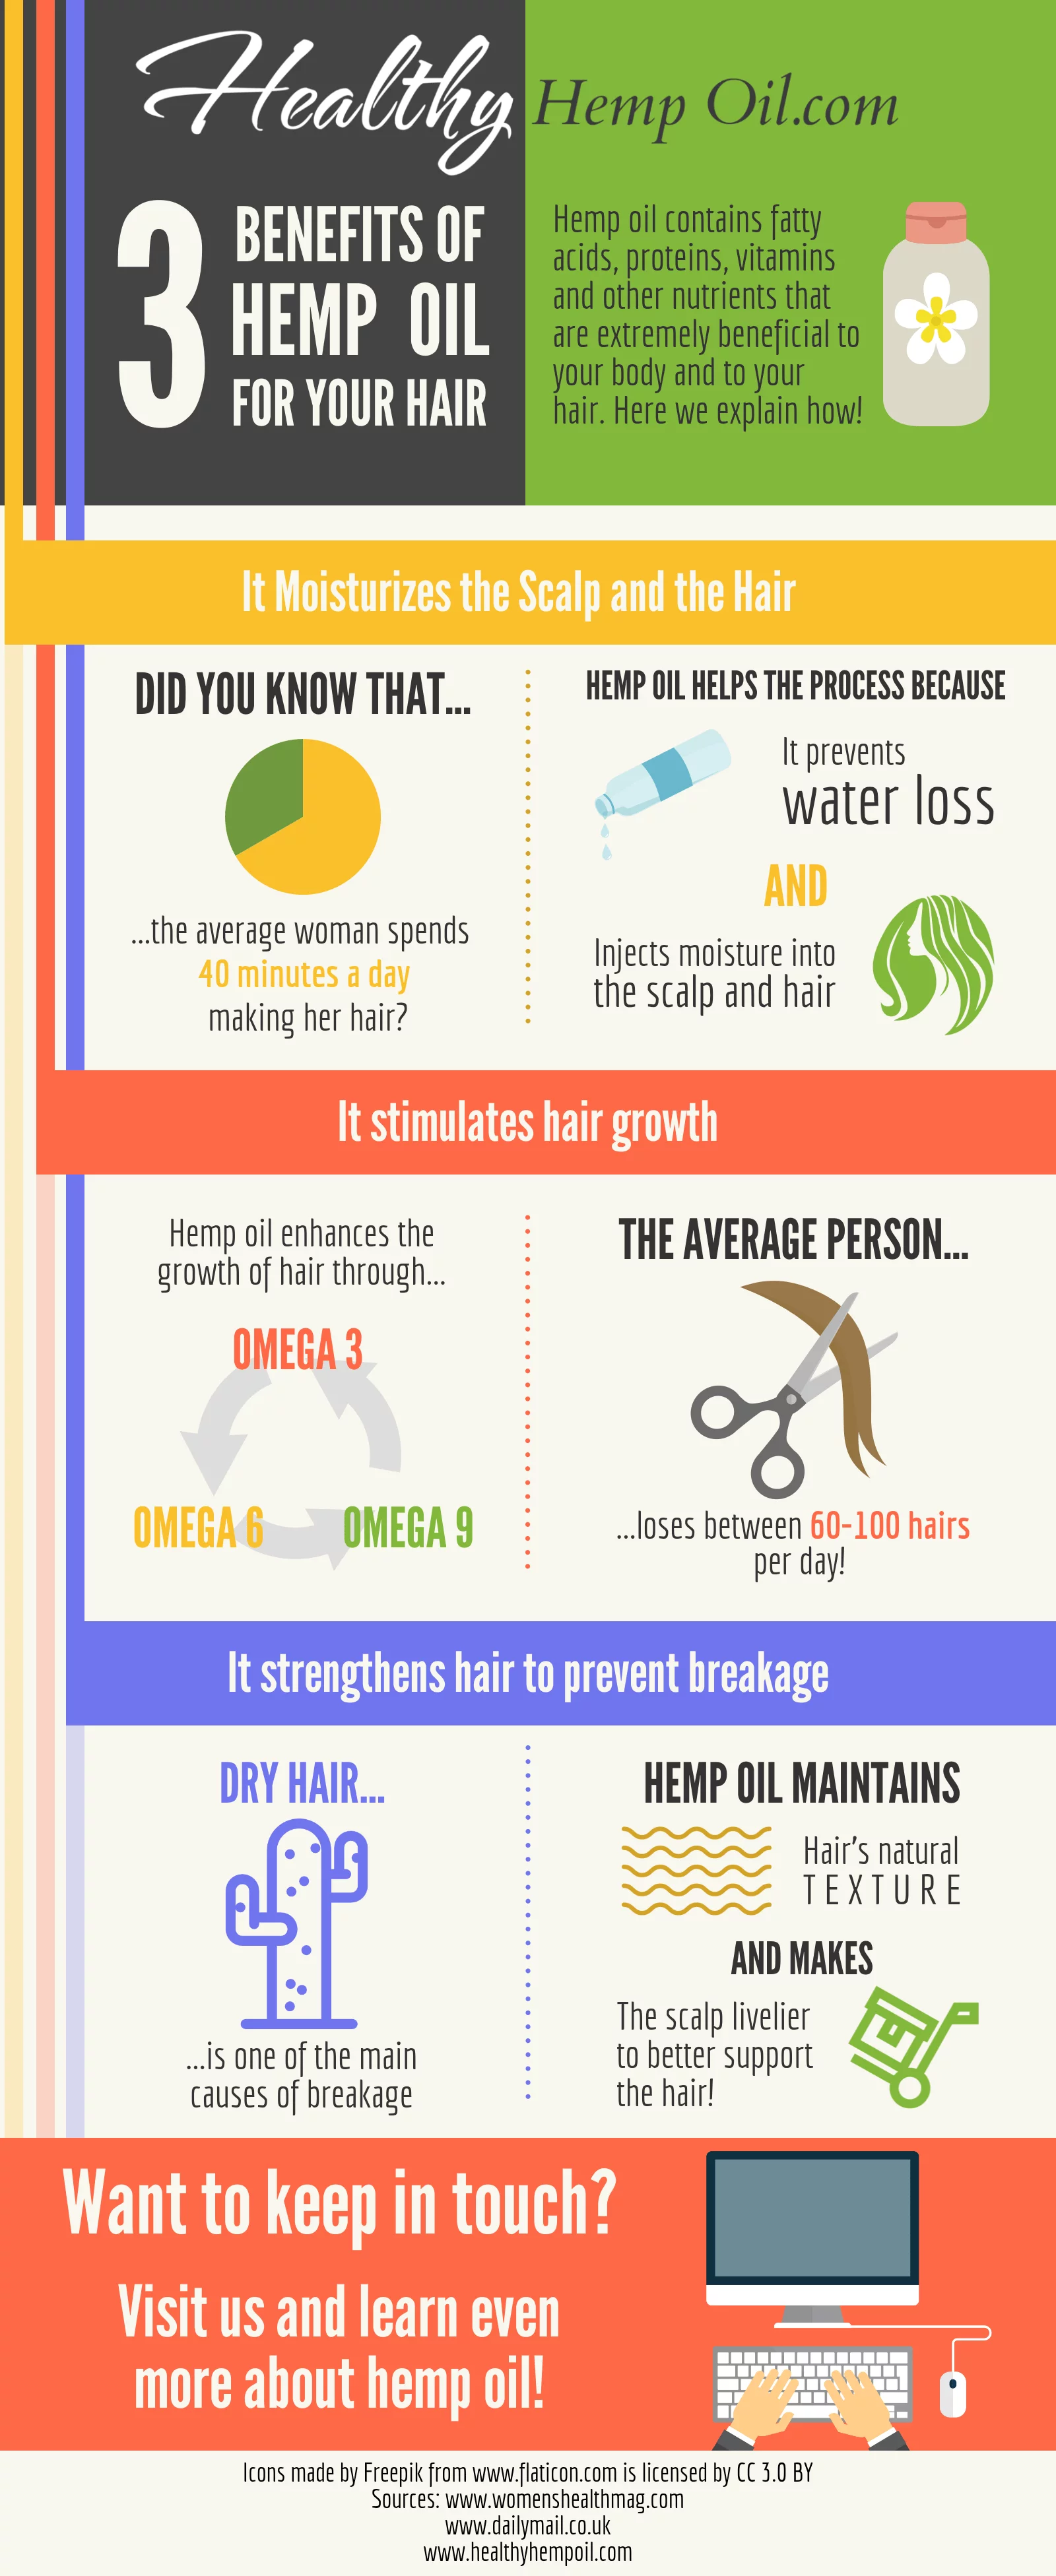 What are the Benefits of Hemp Seed Oil for Your Hair?